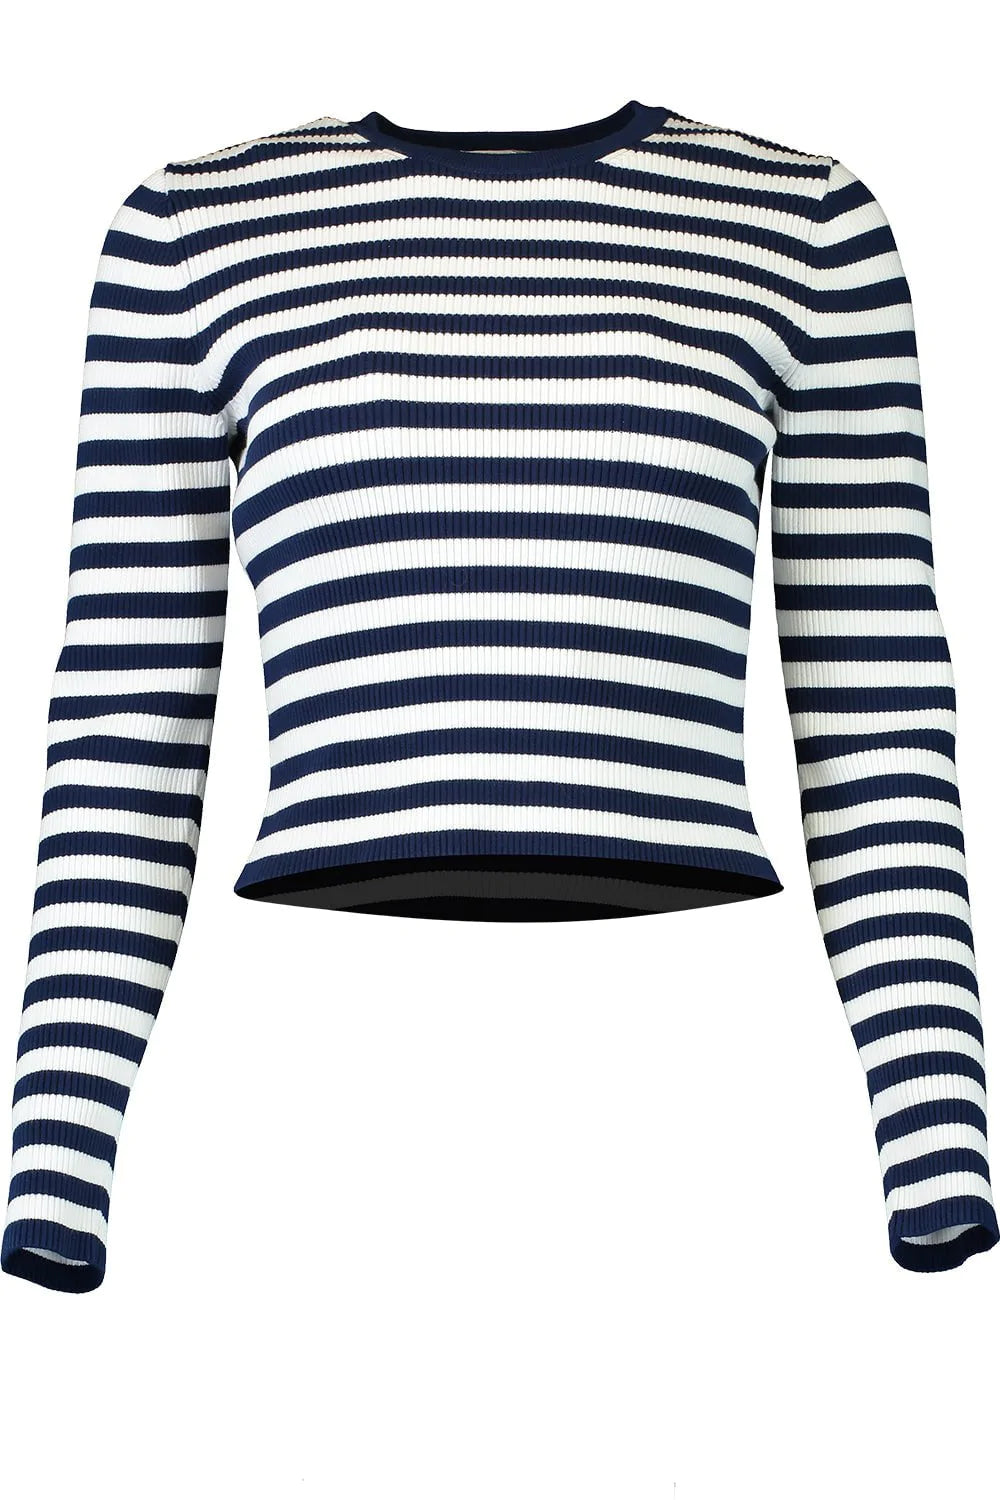 MICHAEL KORS-Long Sleeve Cropped Pullover-